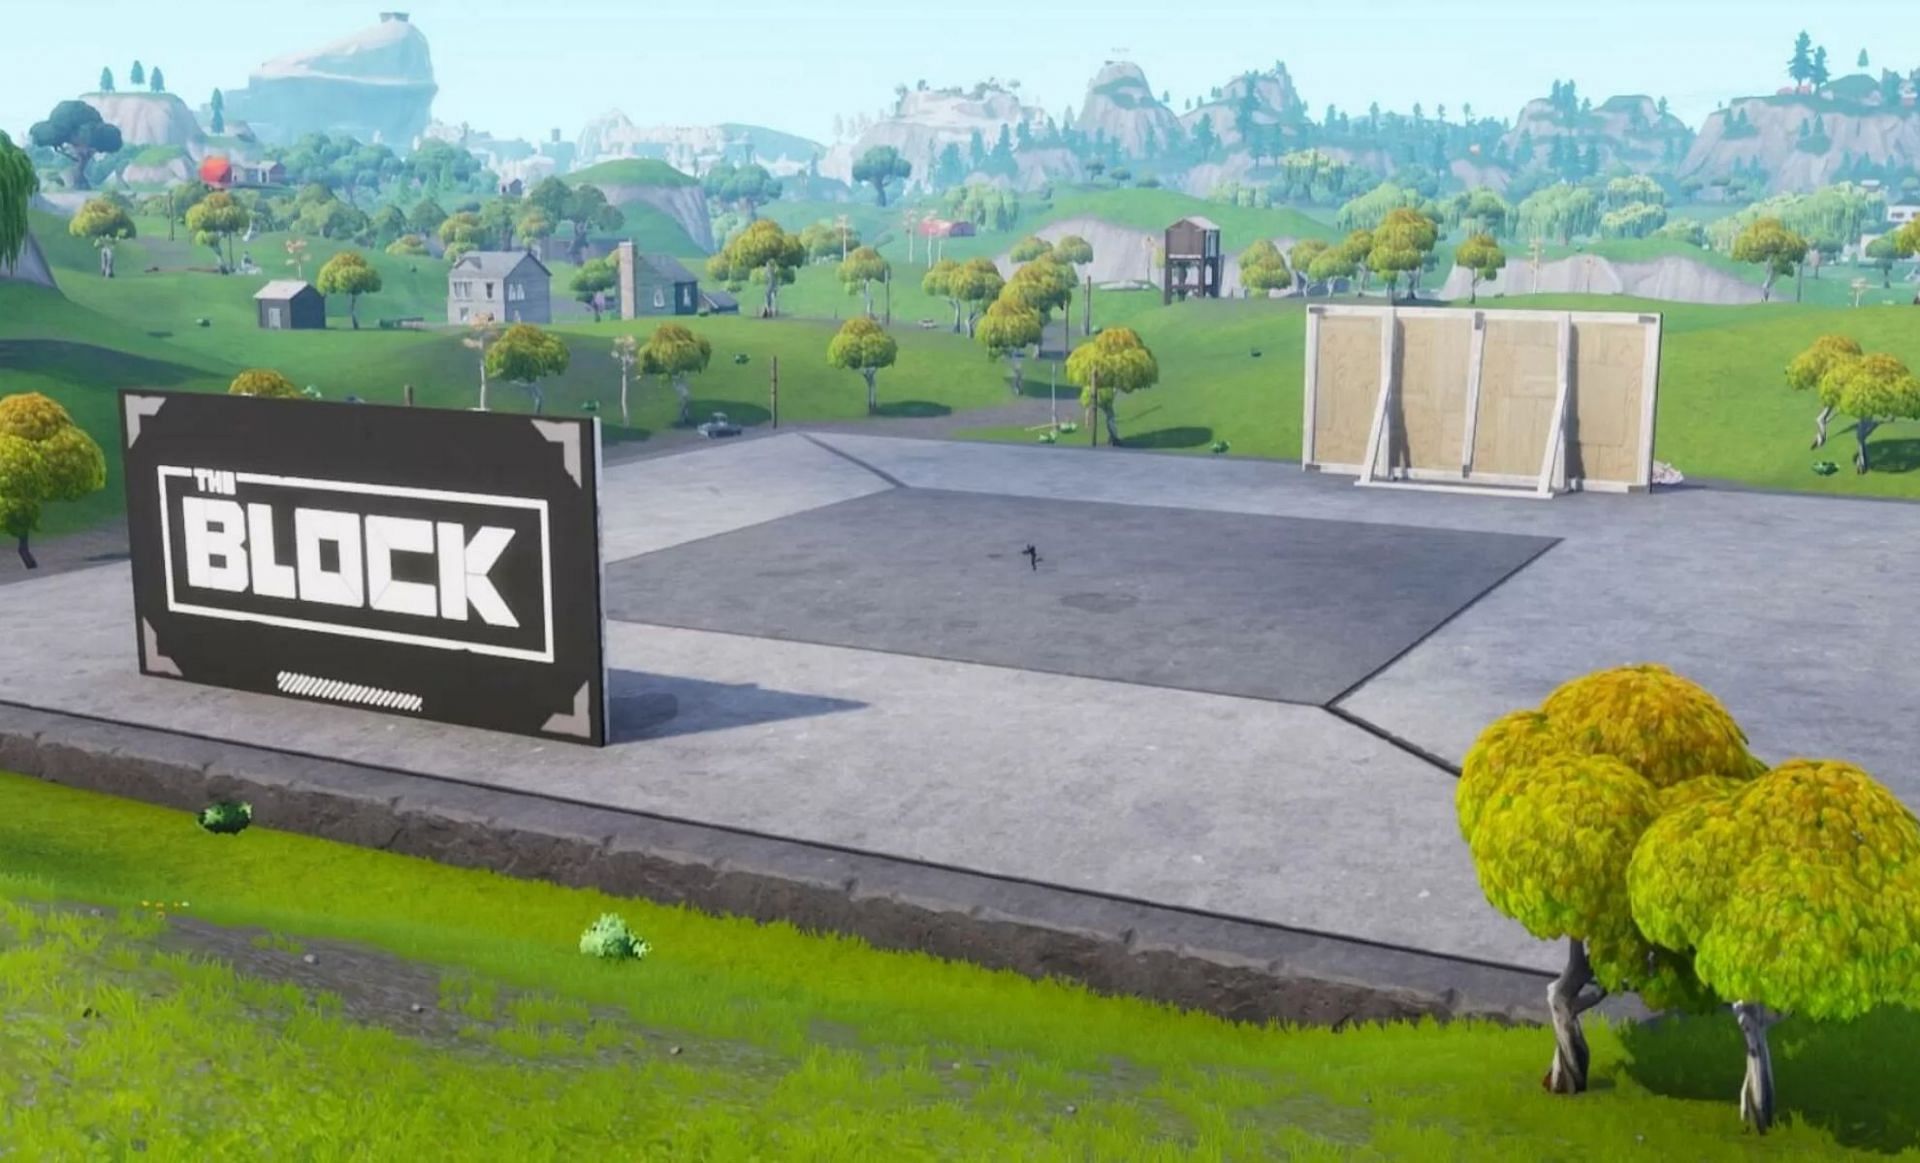 The Block may be returning (Image via HYPEX on Twitter)